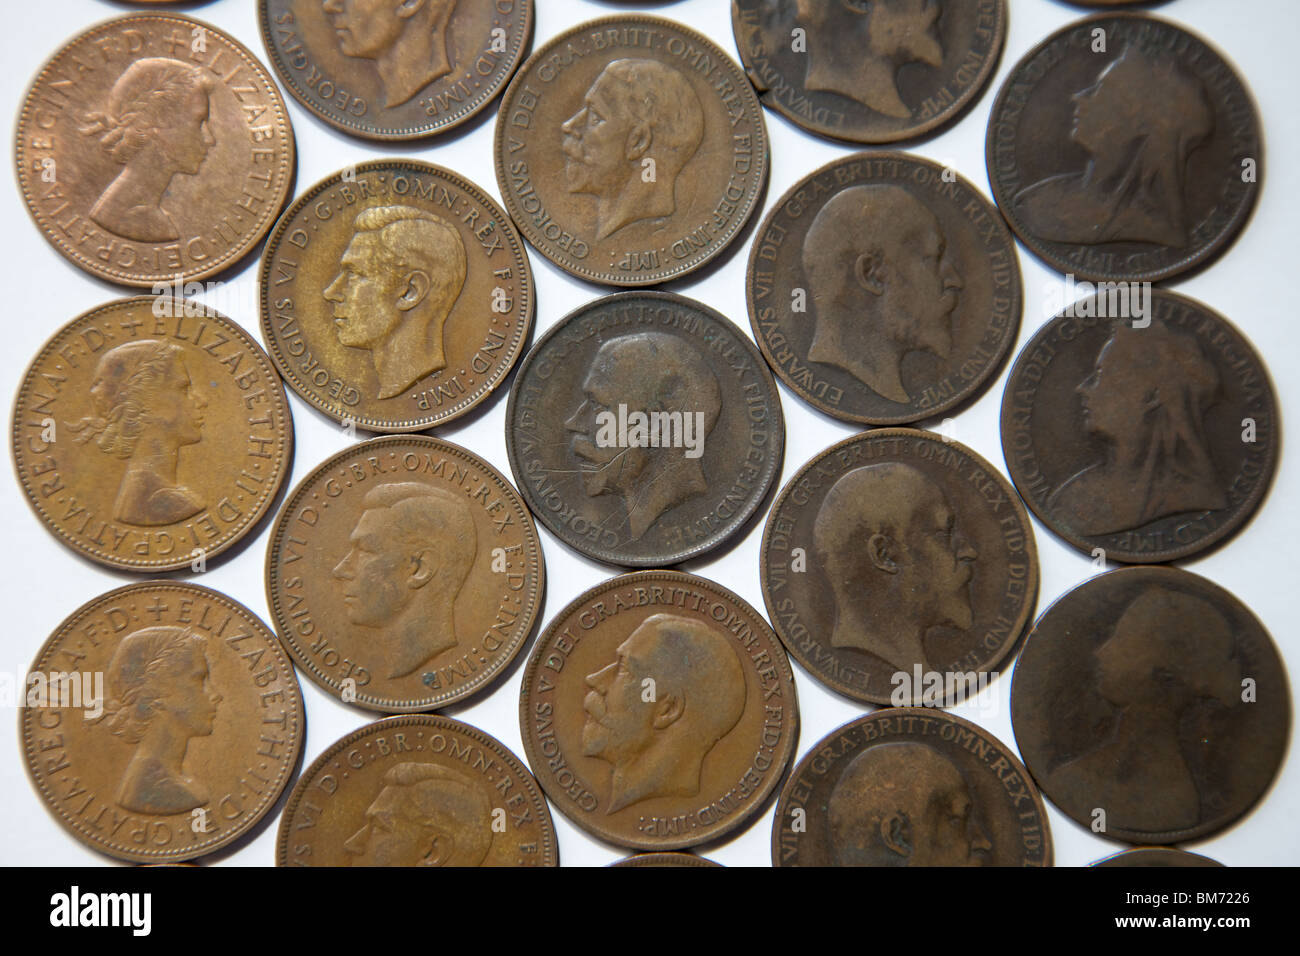 Old British one penny coins Stock Photo